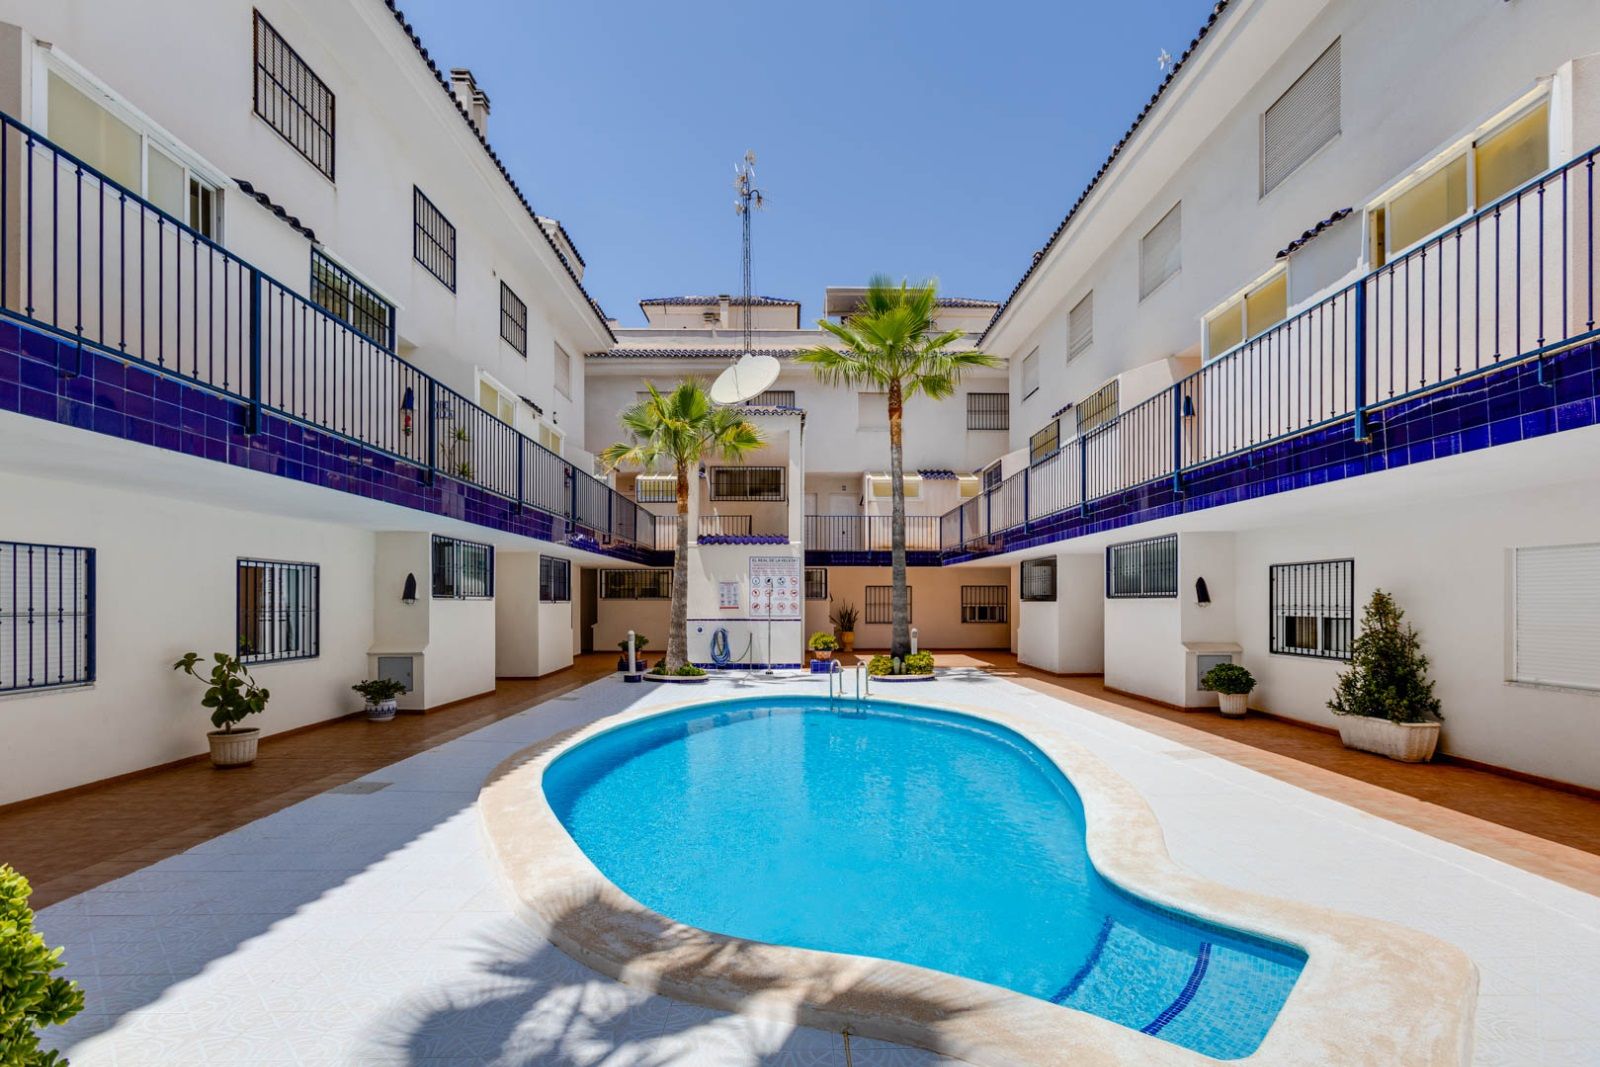 GROUND FLOOR IN MAR AZUL 50M FROM THE SEA